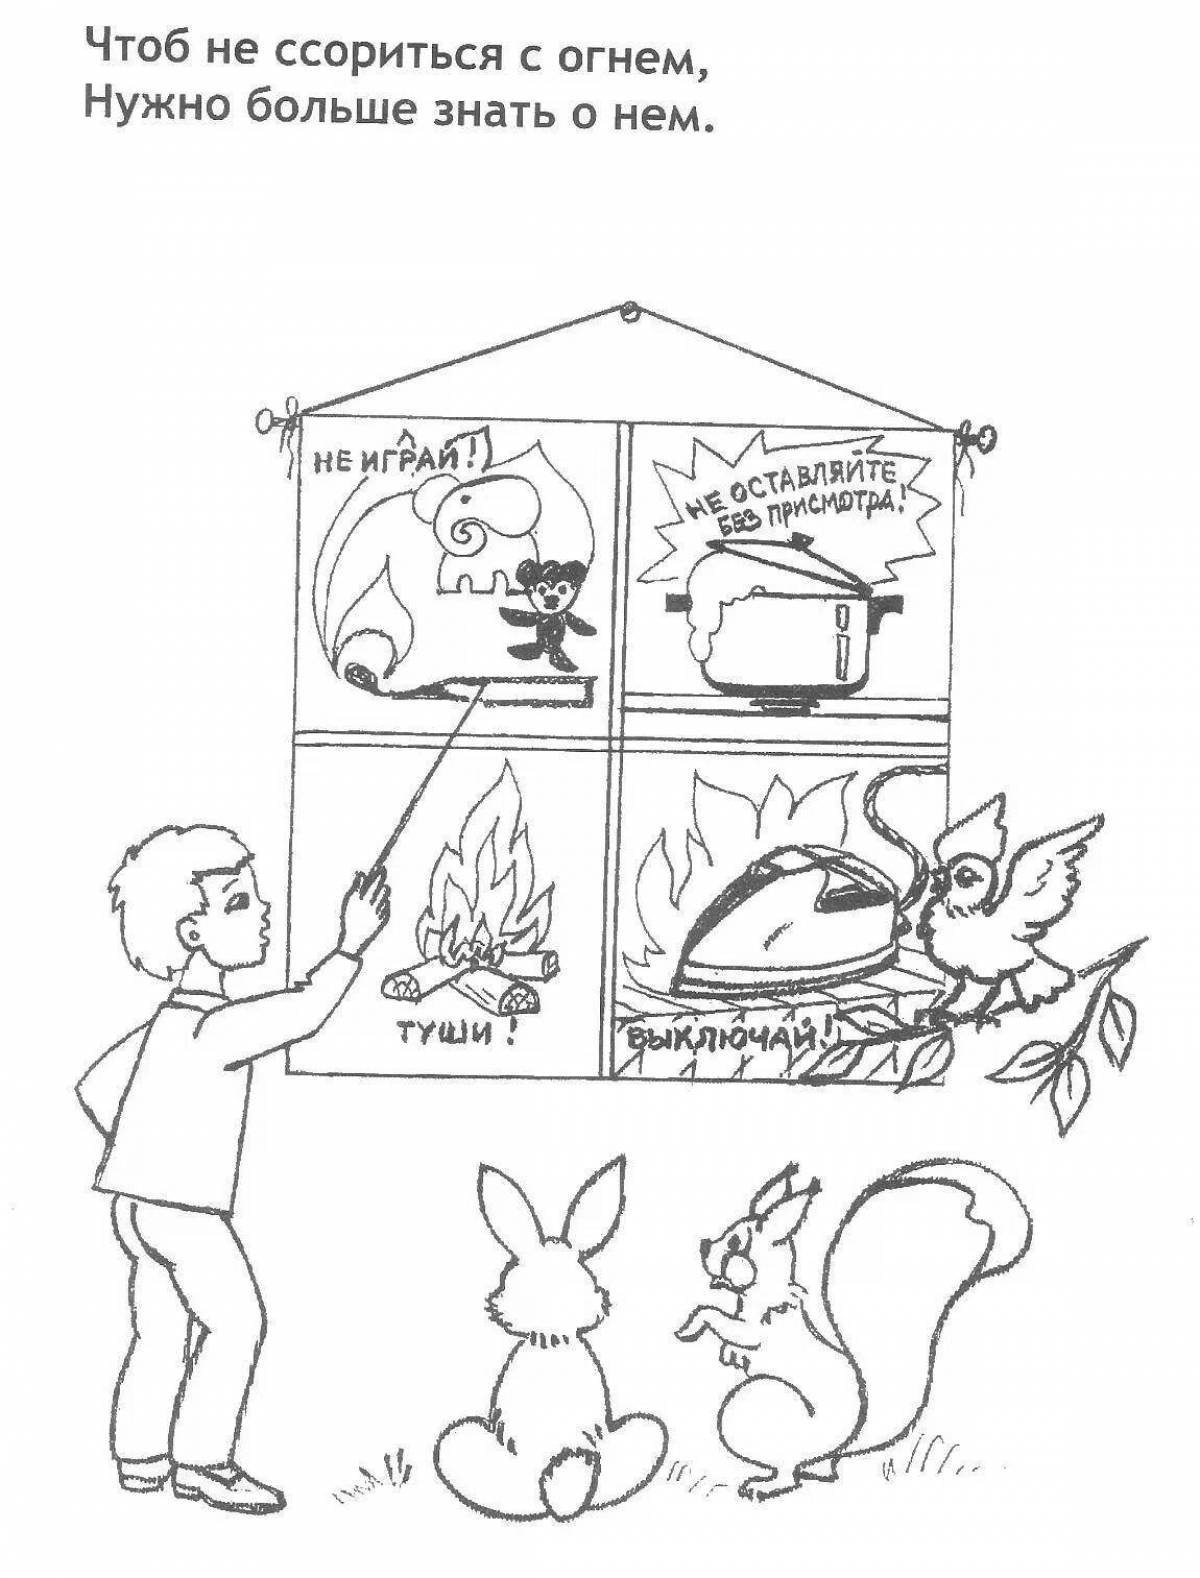 Playful kindergarten fire safety coloring page